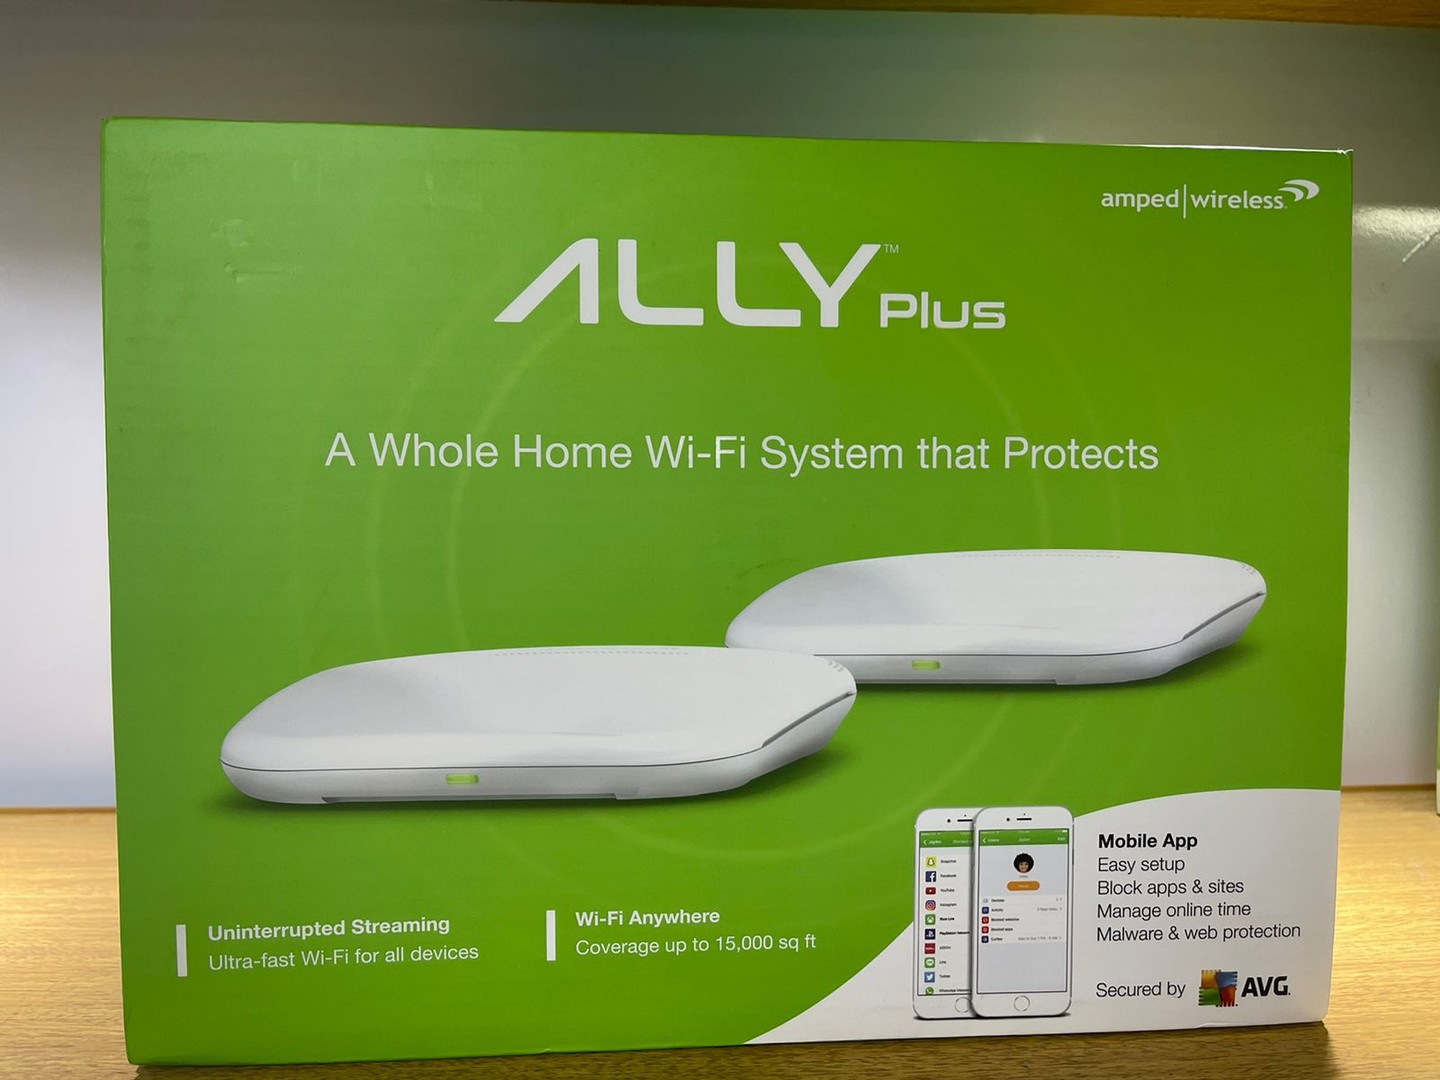 accesorios para electronica - ROUTER / EXTENDER SMART WI-FI (ALLY-0091 K) ALLY PLUS AMPED 0